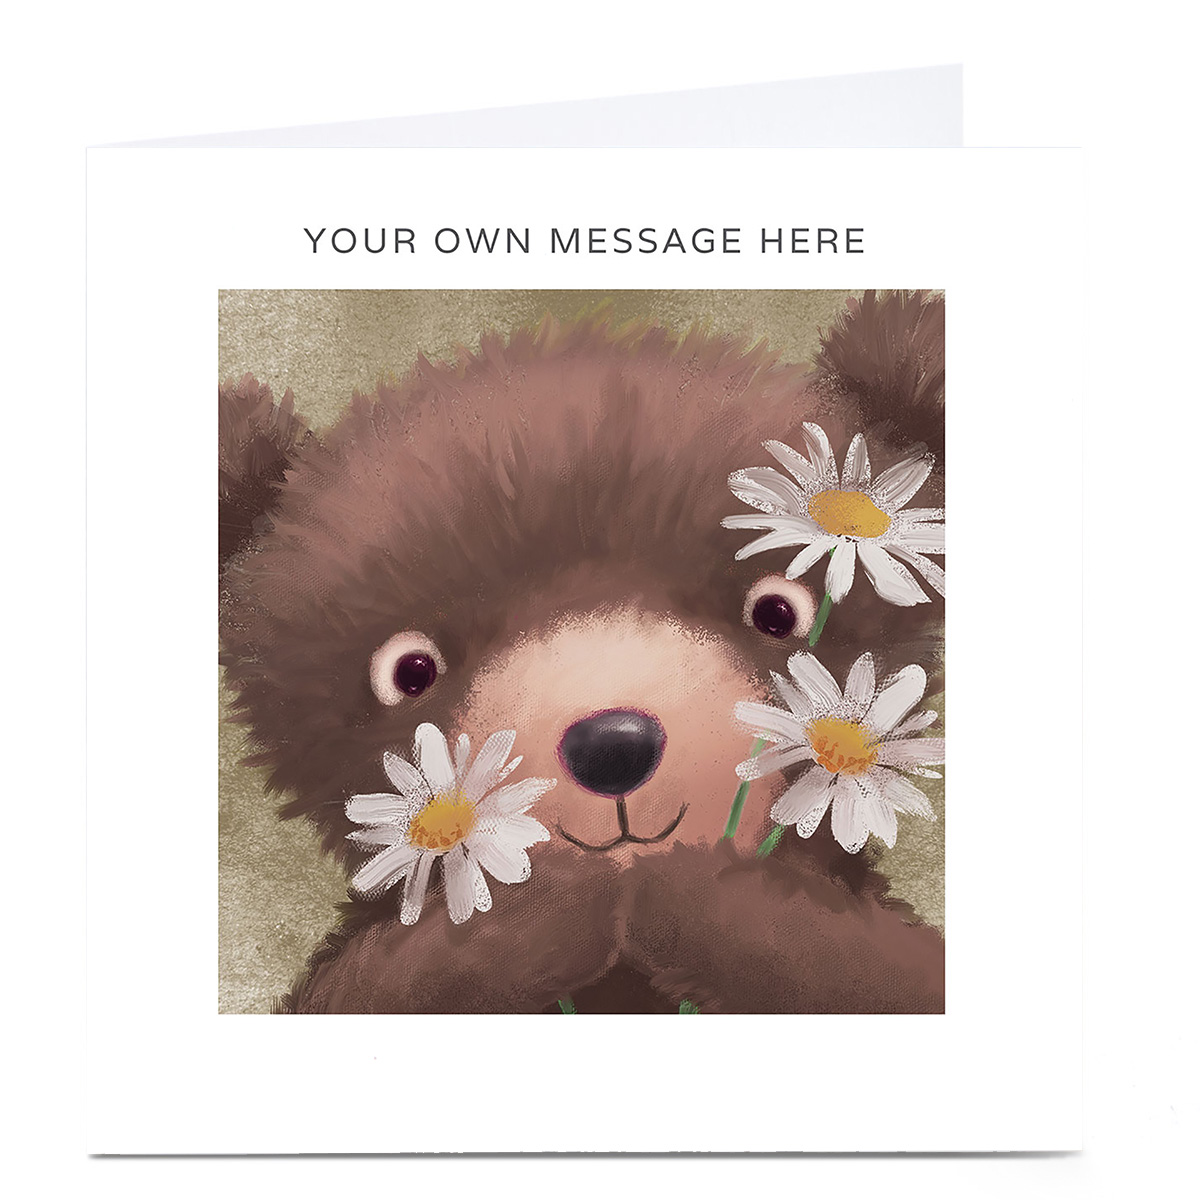 Personalised Card - Teddy Bear With Daisies